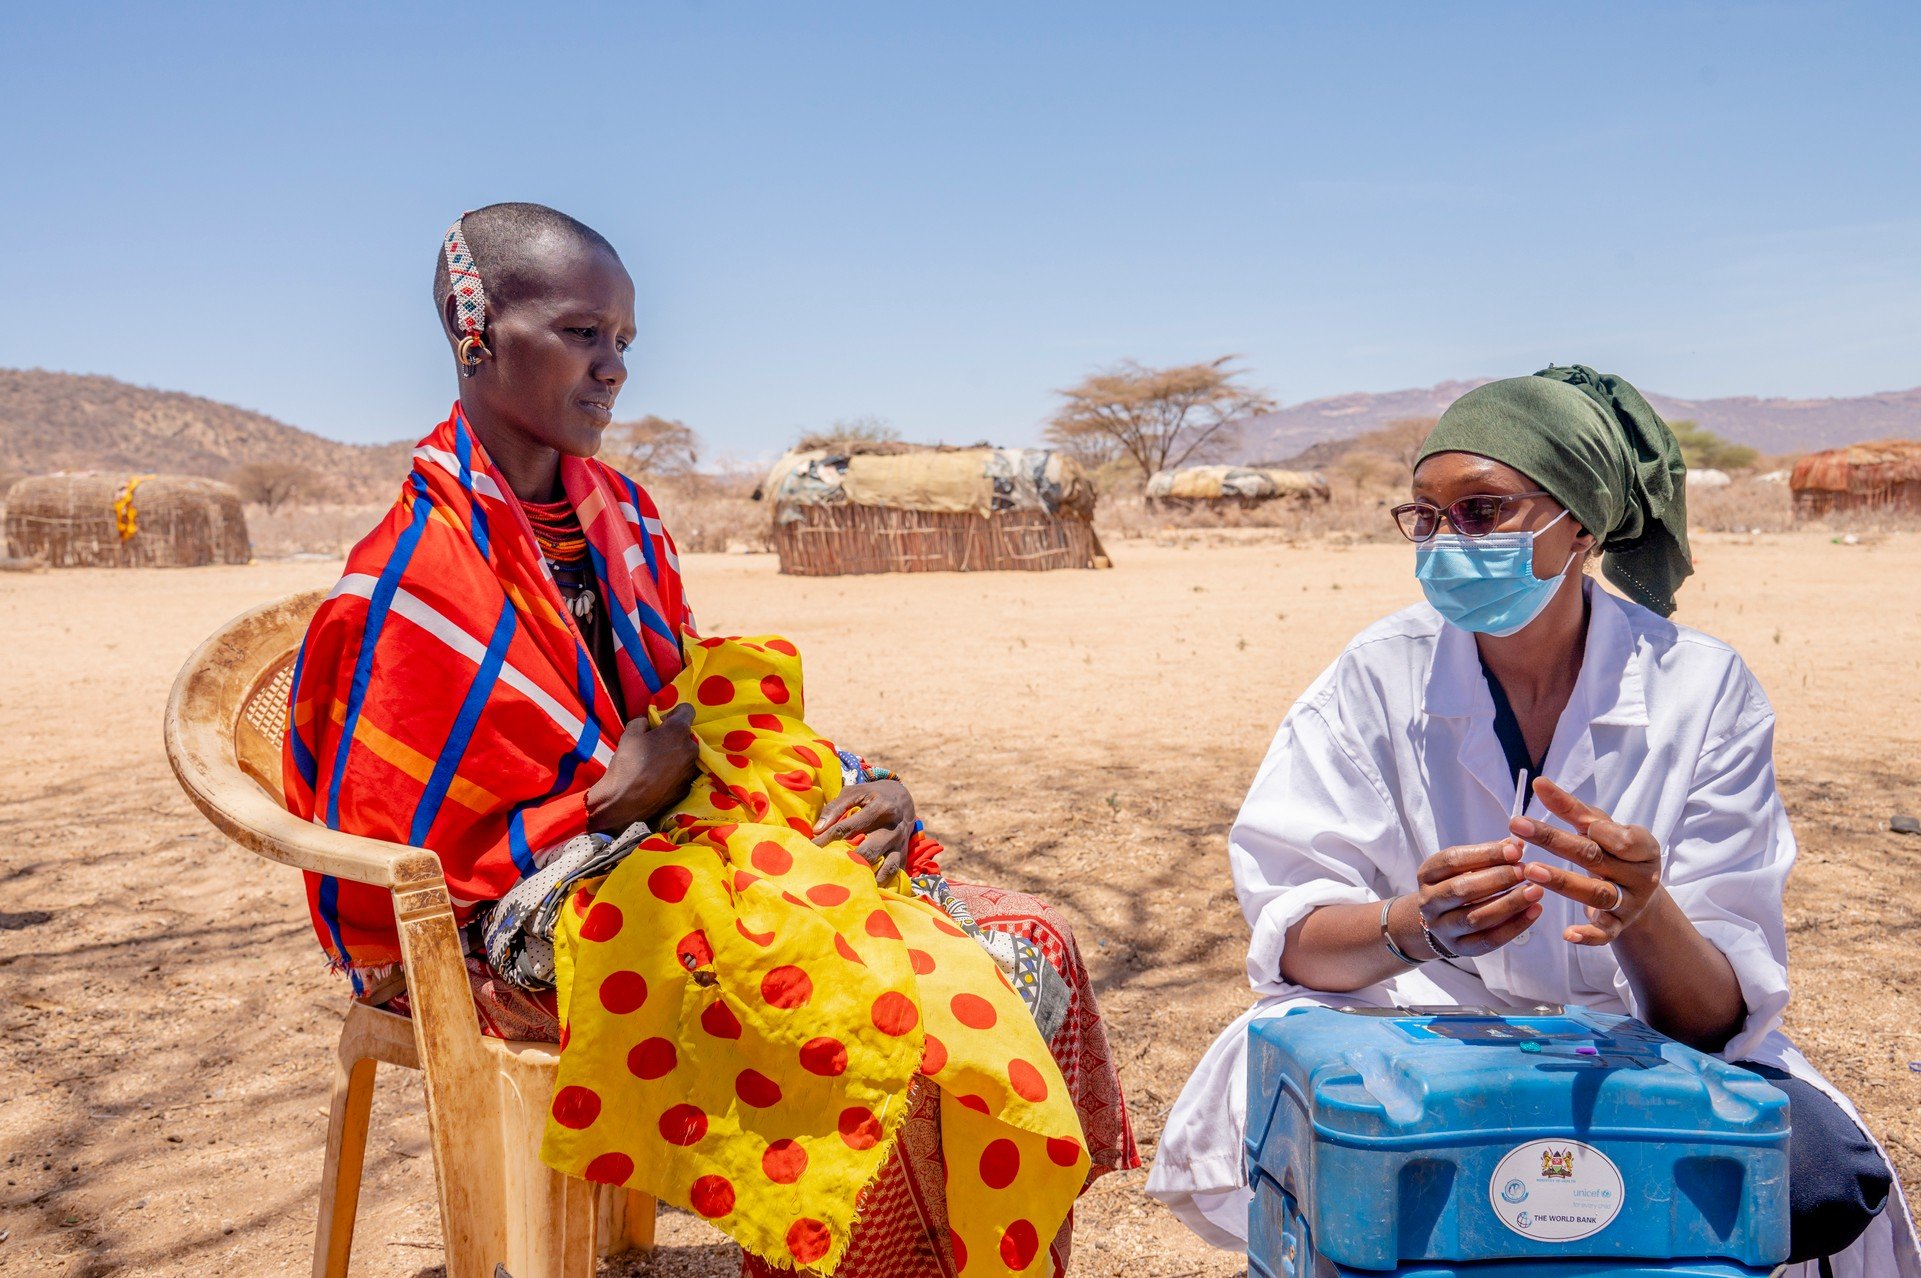 KENYA: Drought, food insecurity and health - September 2022